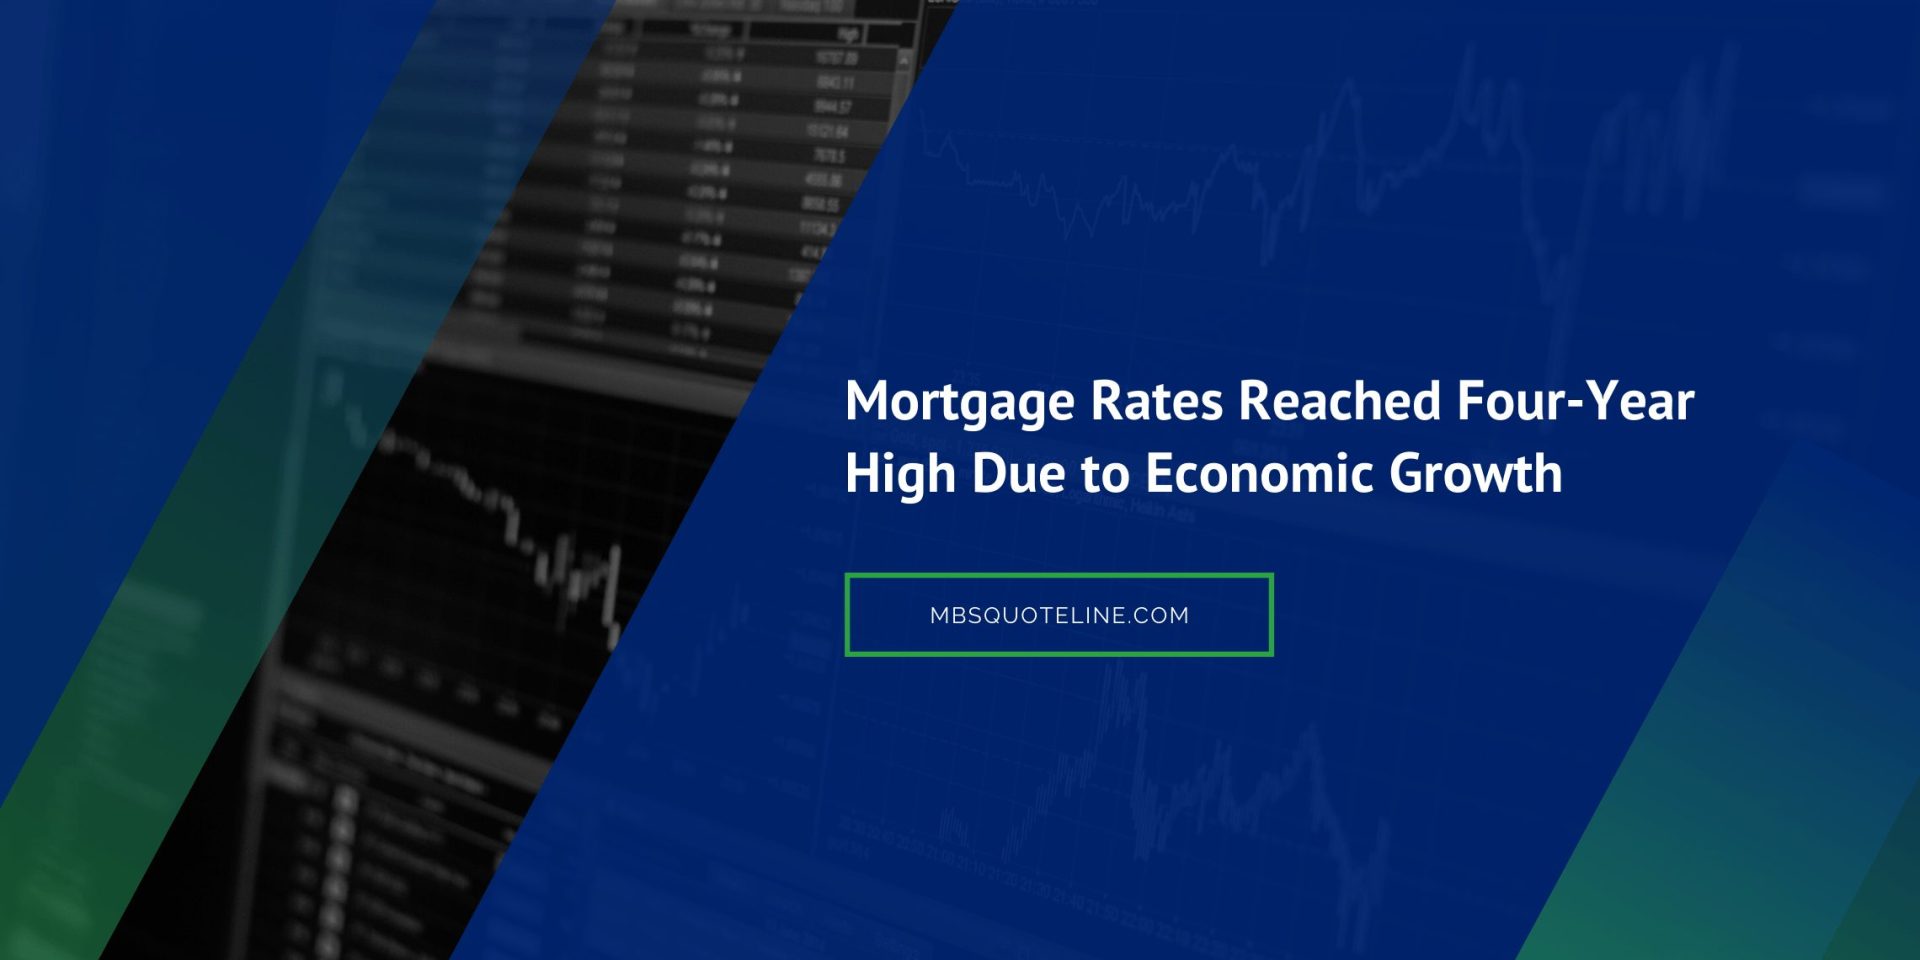 mortgage rates reached four-year high due to economic growth news mbsquoteline